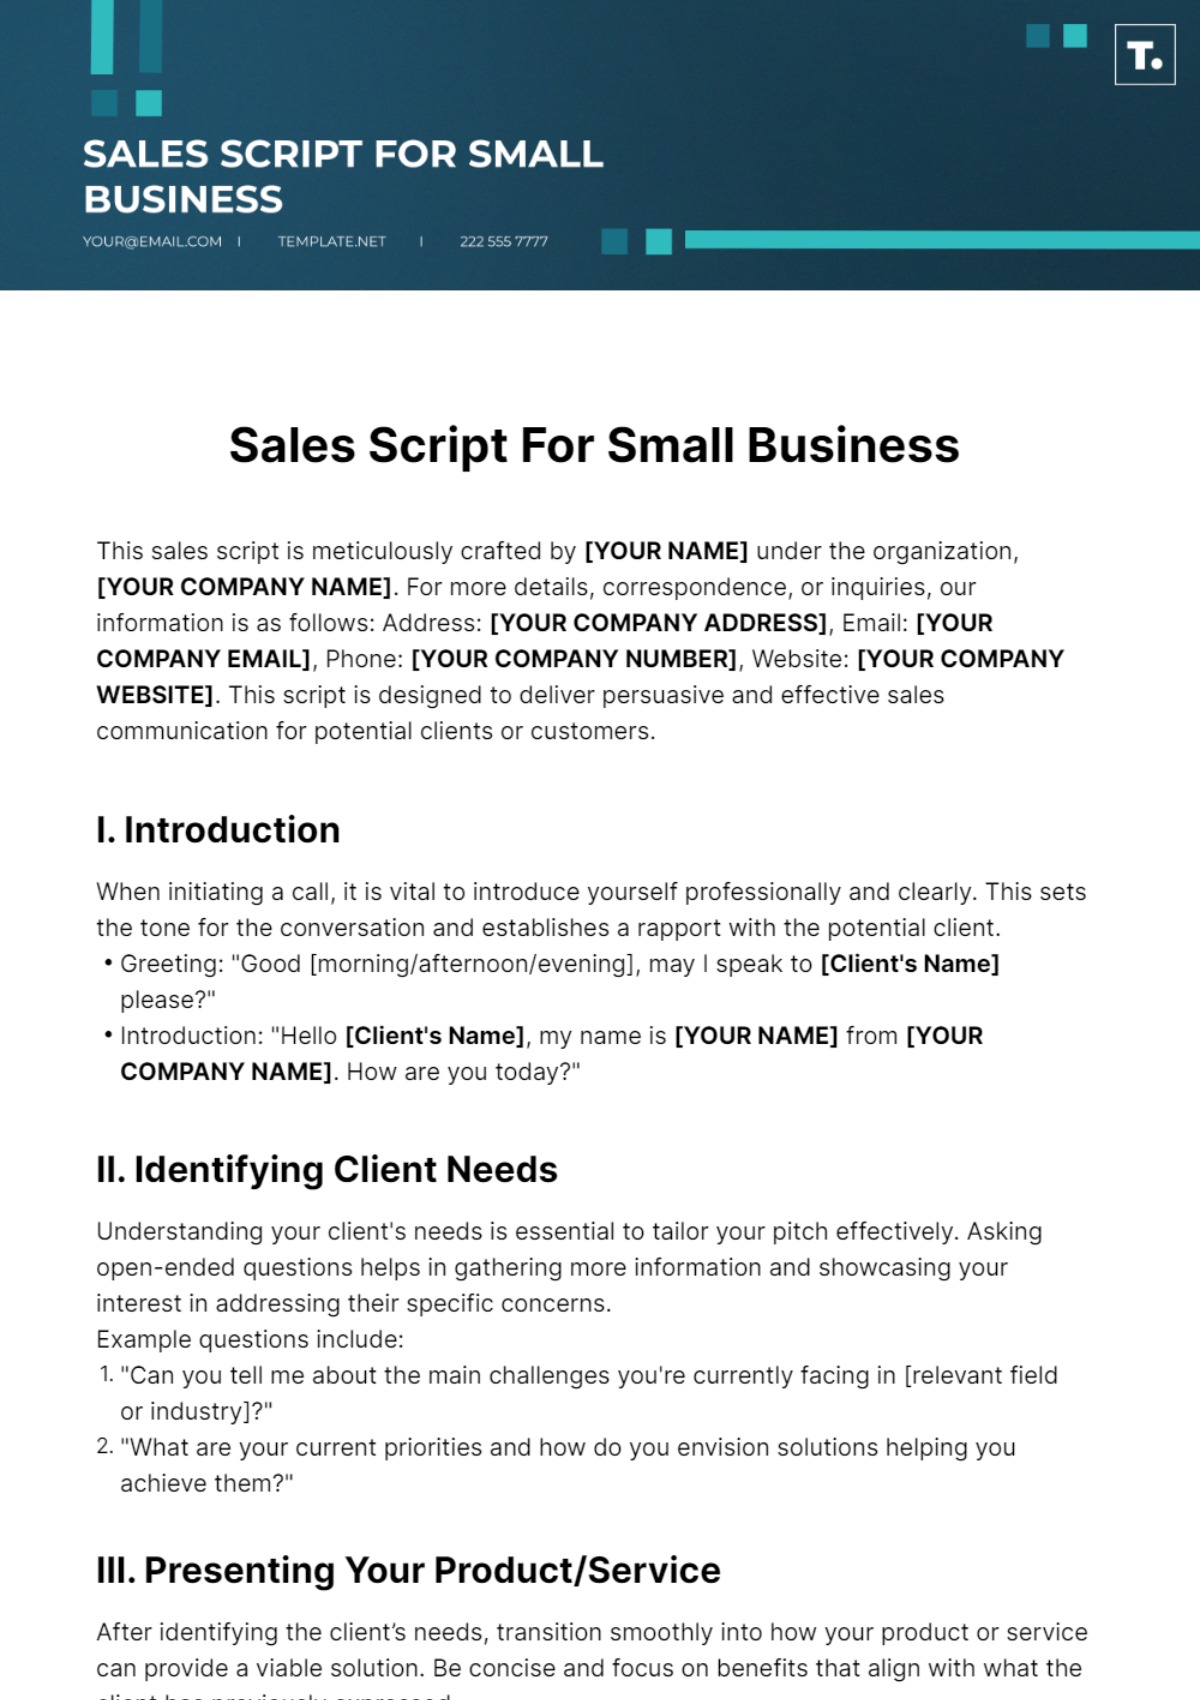 Free Sales Script For Small Business Template